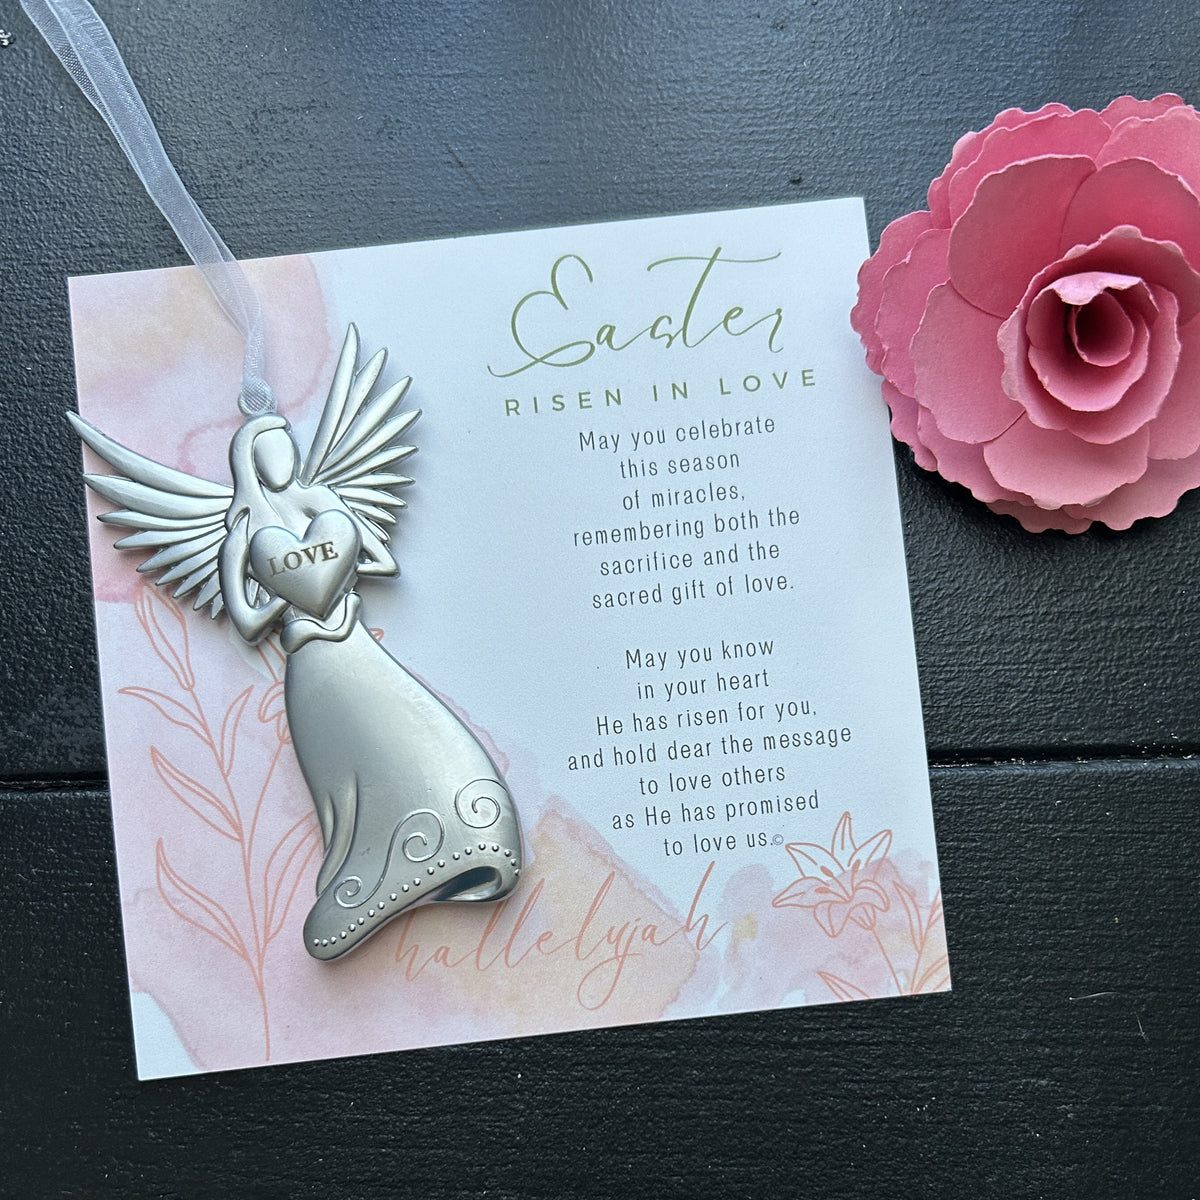 Easter Love angel with white organza ribbon for hanging.  Angel is lying on the Easter Risen in Love artwork with sentiment.